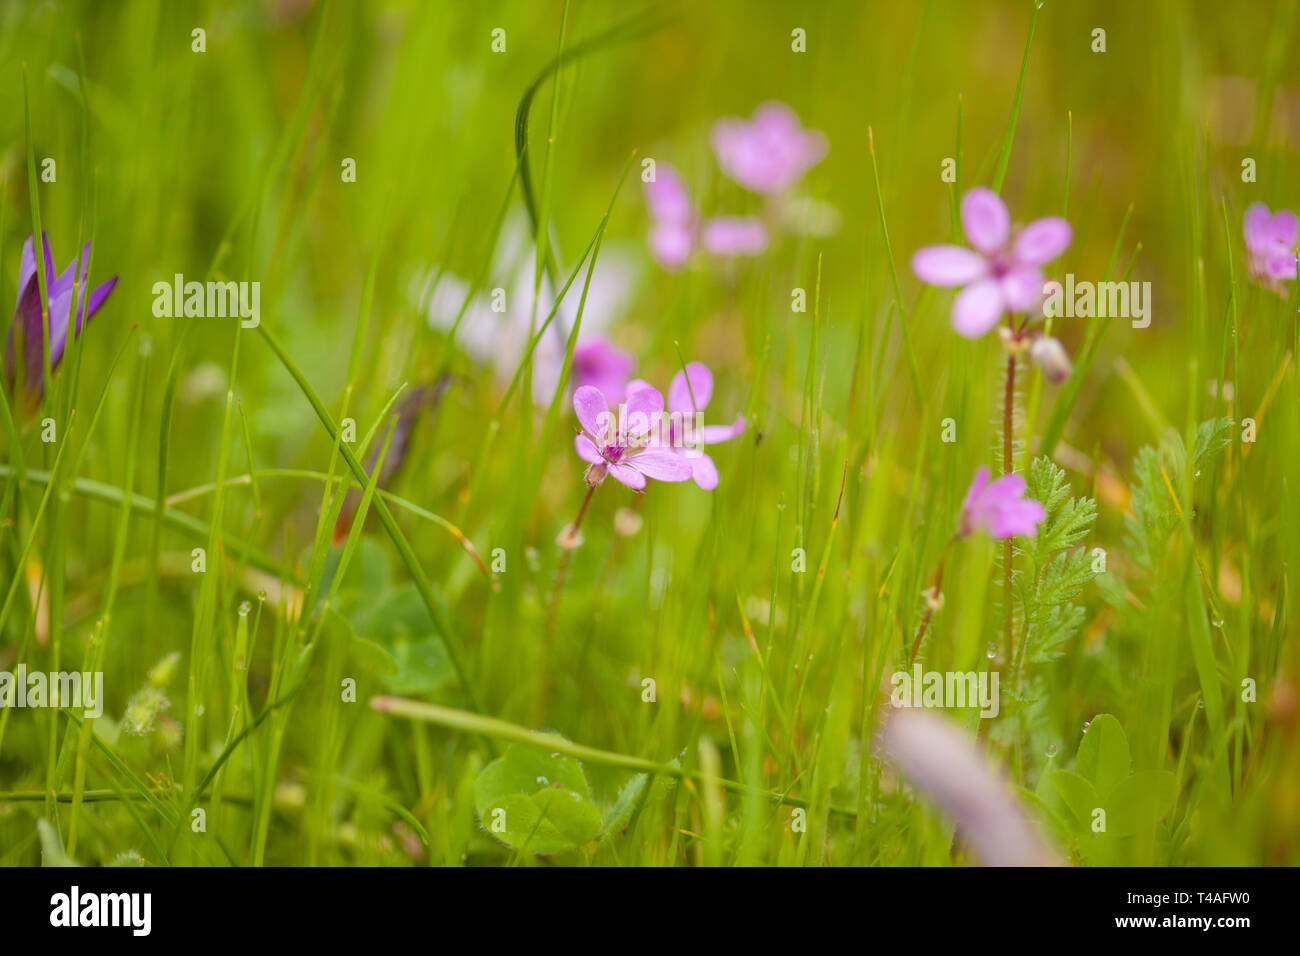 Flora of Gran Canaria - pale pink flowers of Erodium in green grass Stock Photo